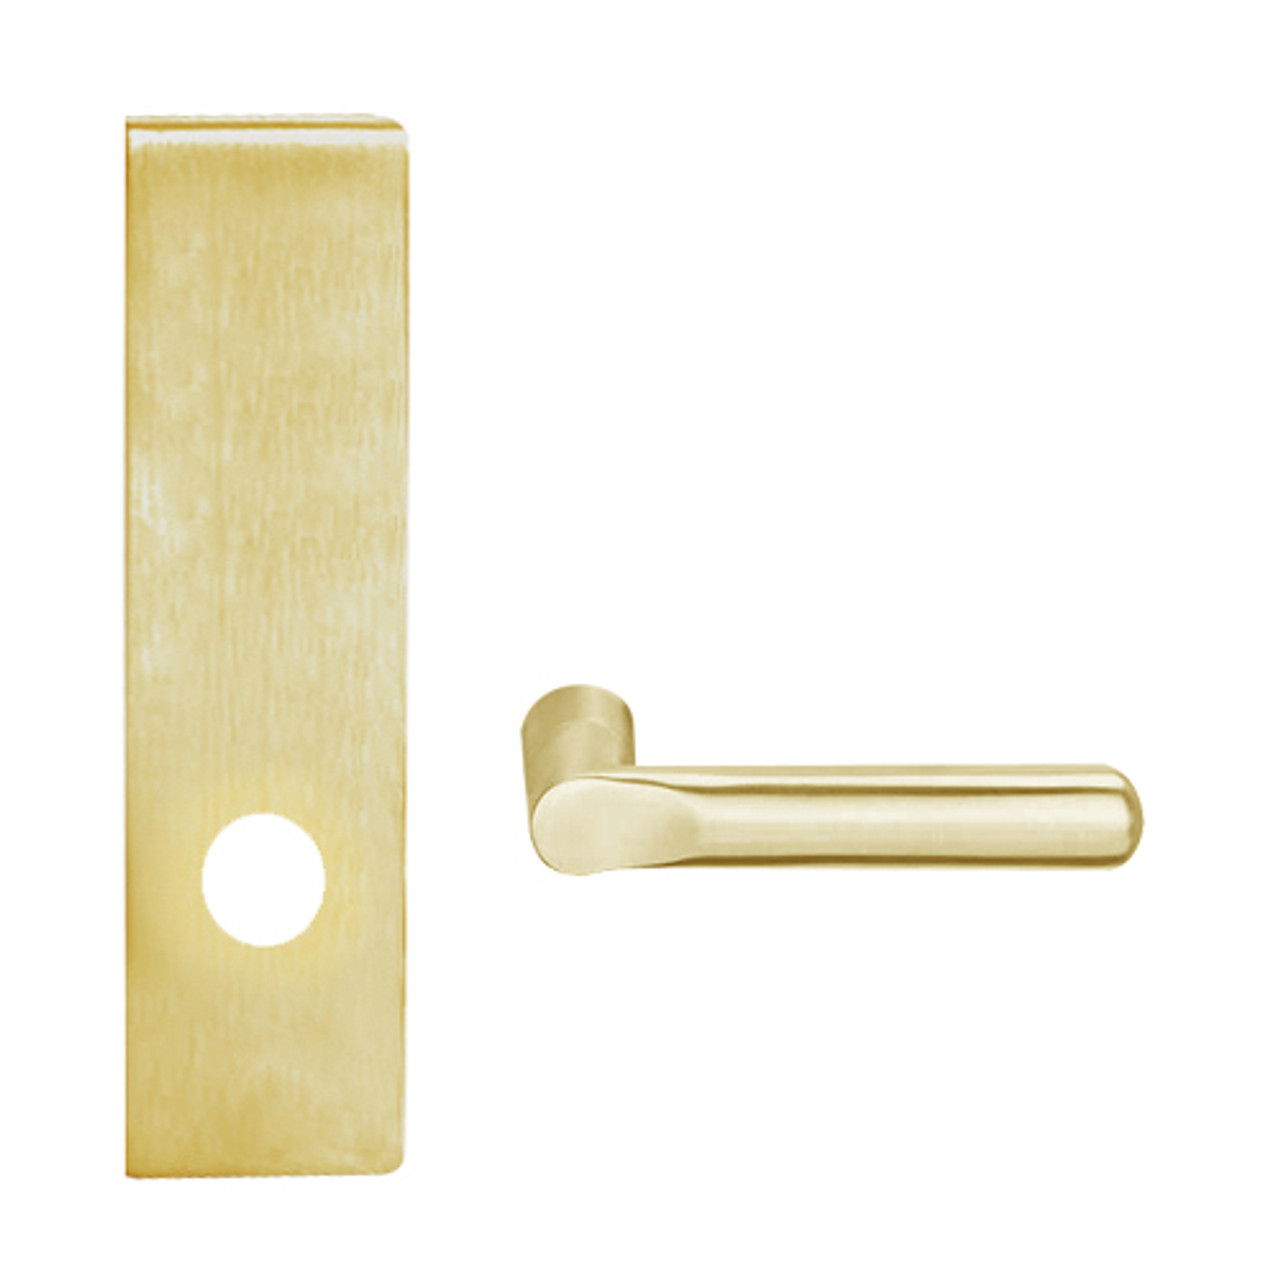 L9040-18N-605 Schlage L Series Privacy Commercial Mortise Lock with 18 Cast Lever Design in Bright Brass